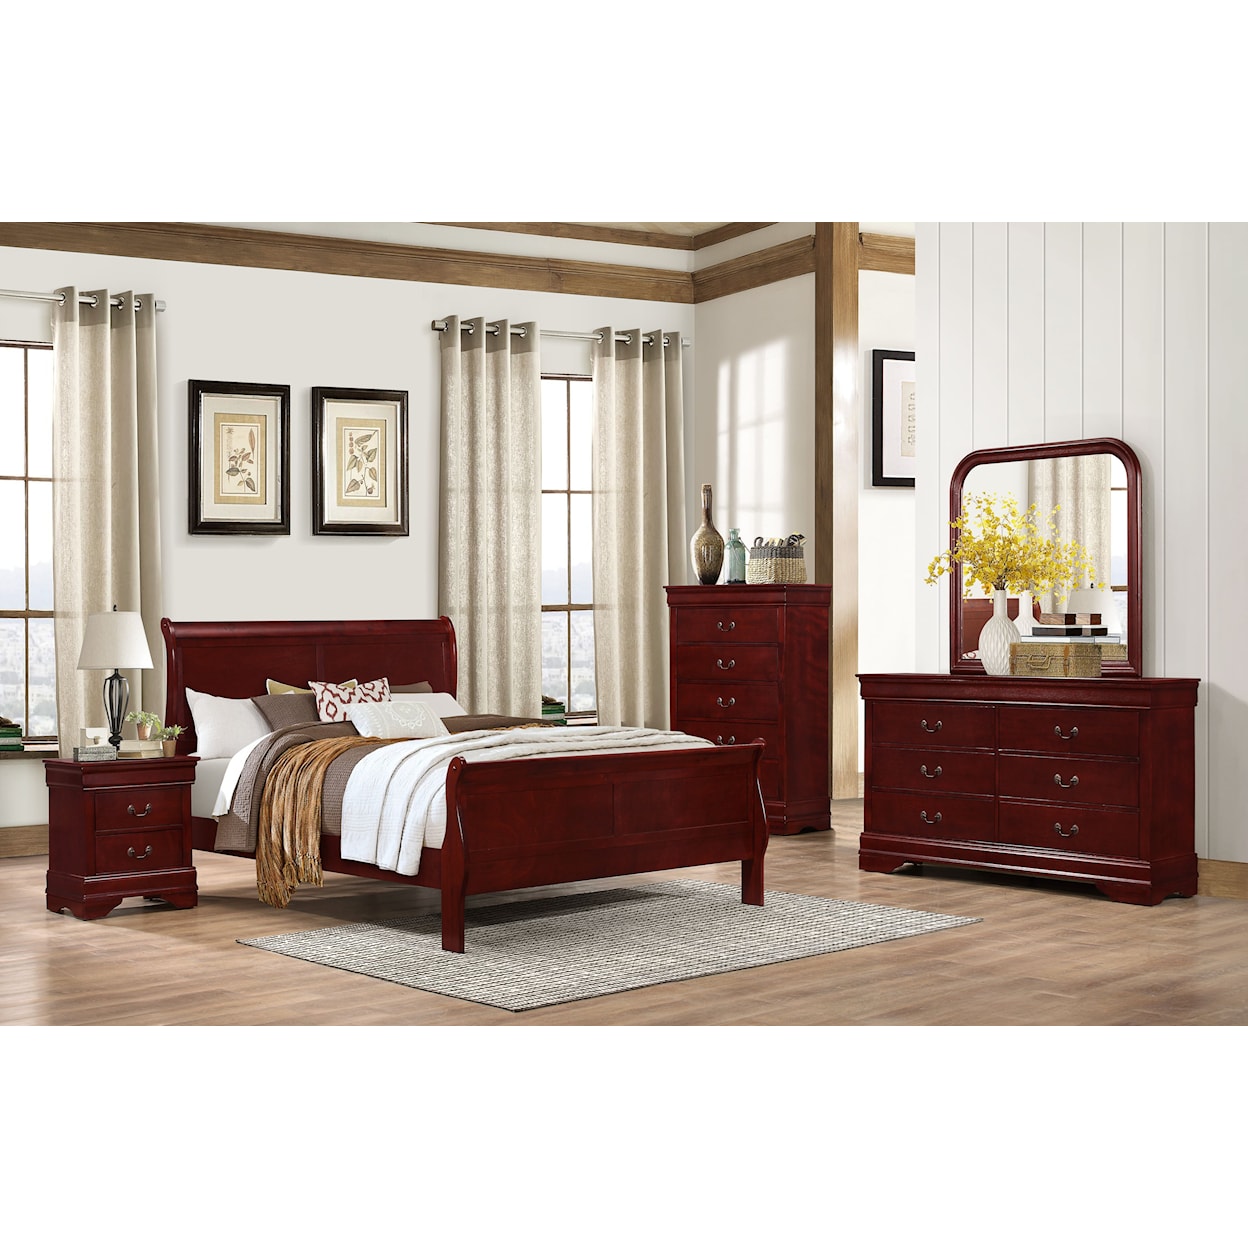 Lifestyle 4937 5 Piece Full Bedroom Set with Chest